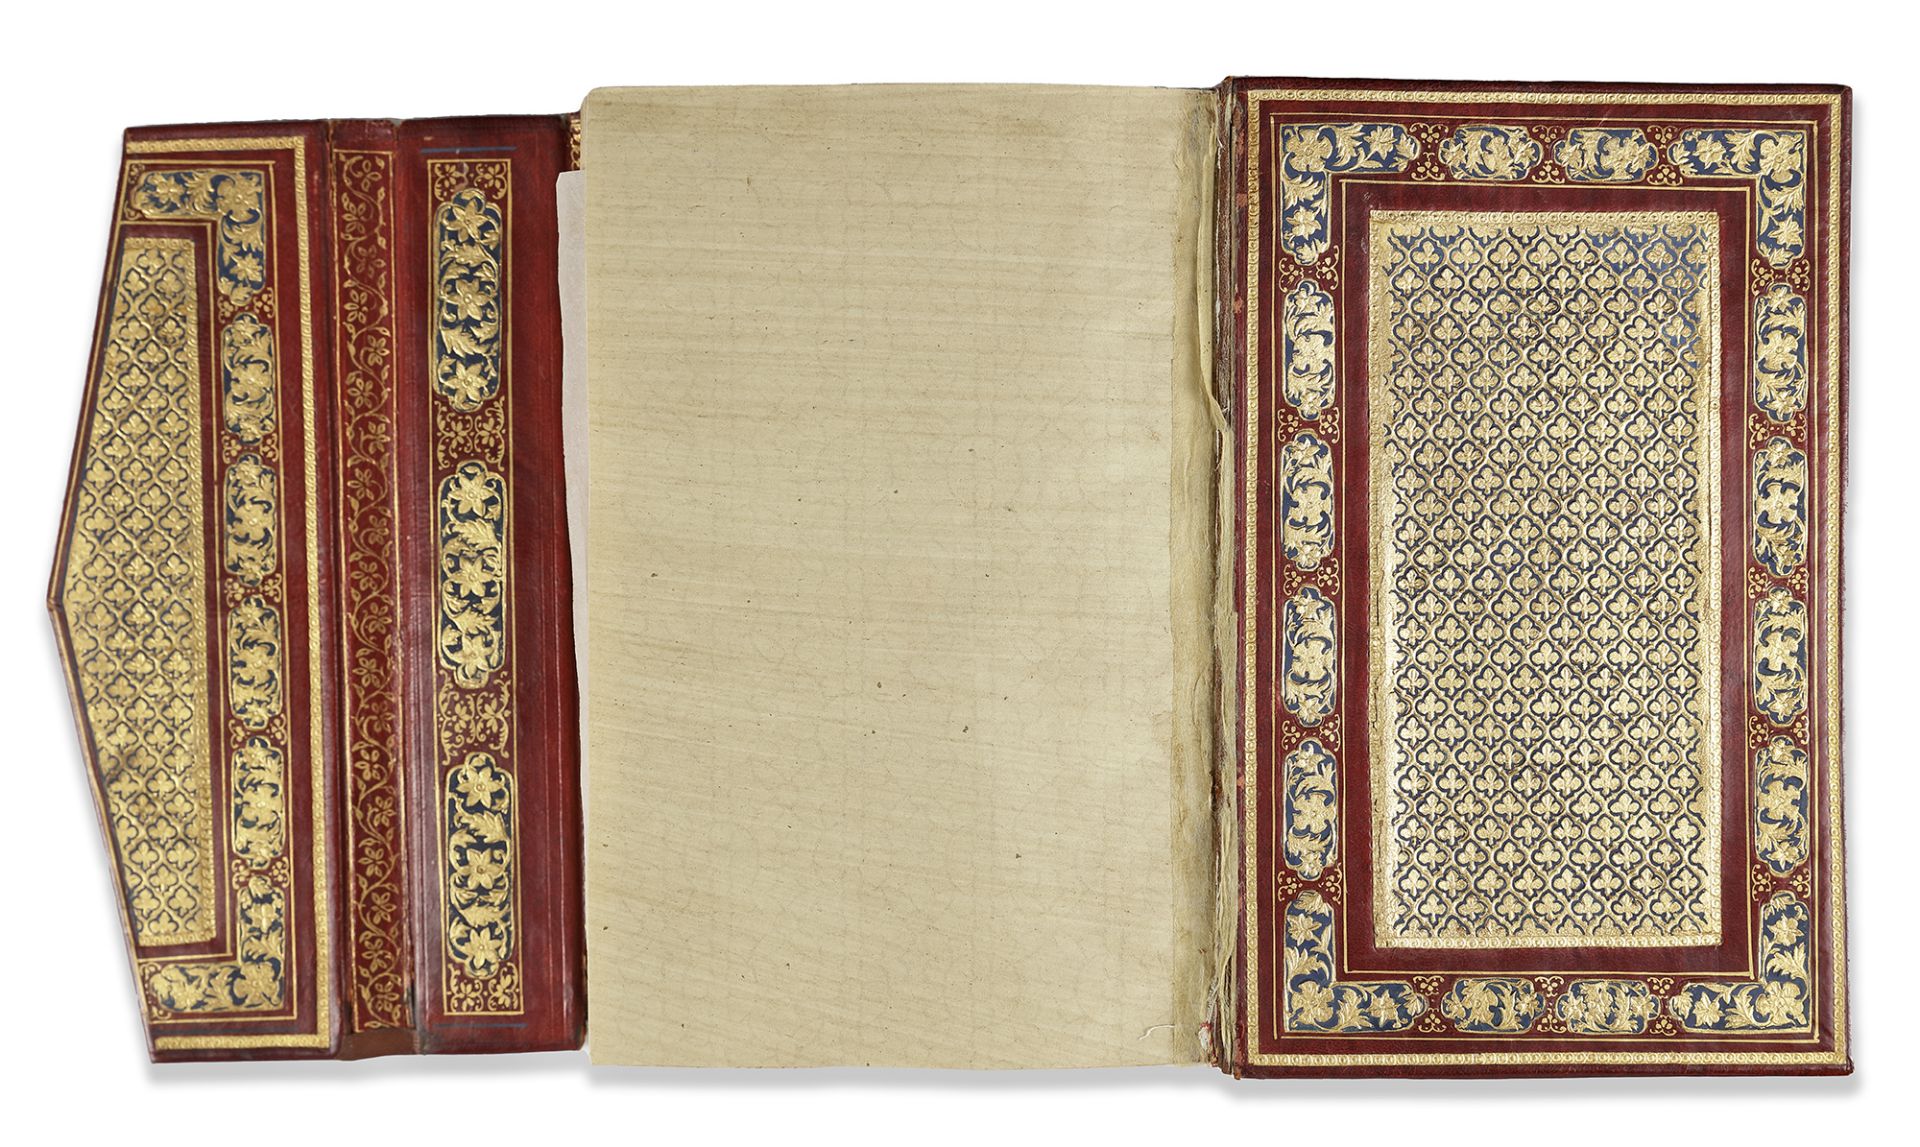 A FINELY ILLUMINATED QURAN, CENTRAL ASIA, 18TH CENTURY - Image 6 of 8